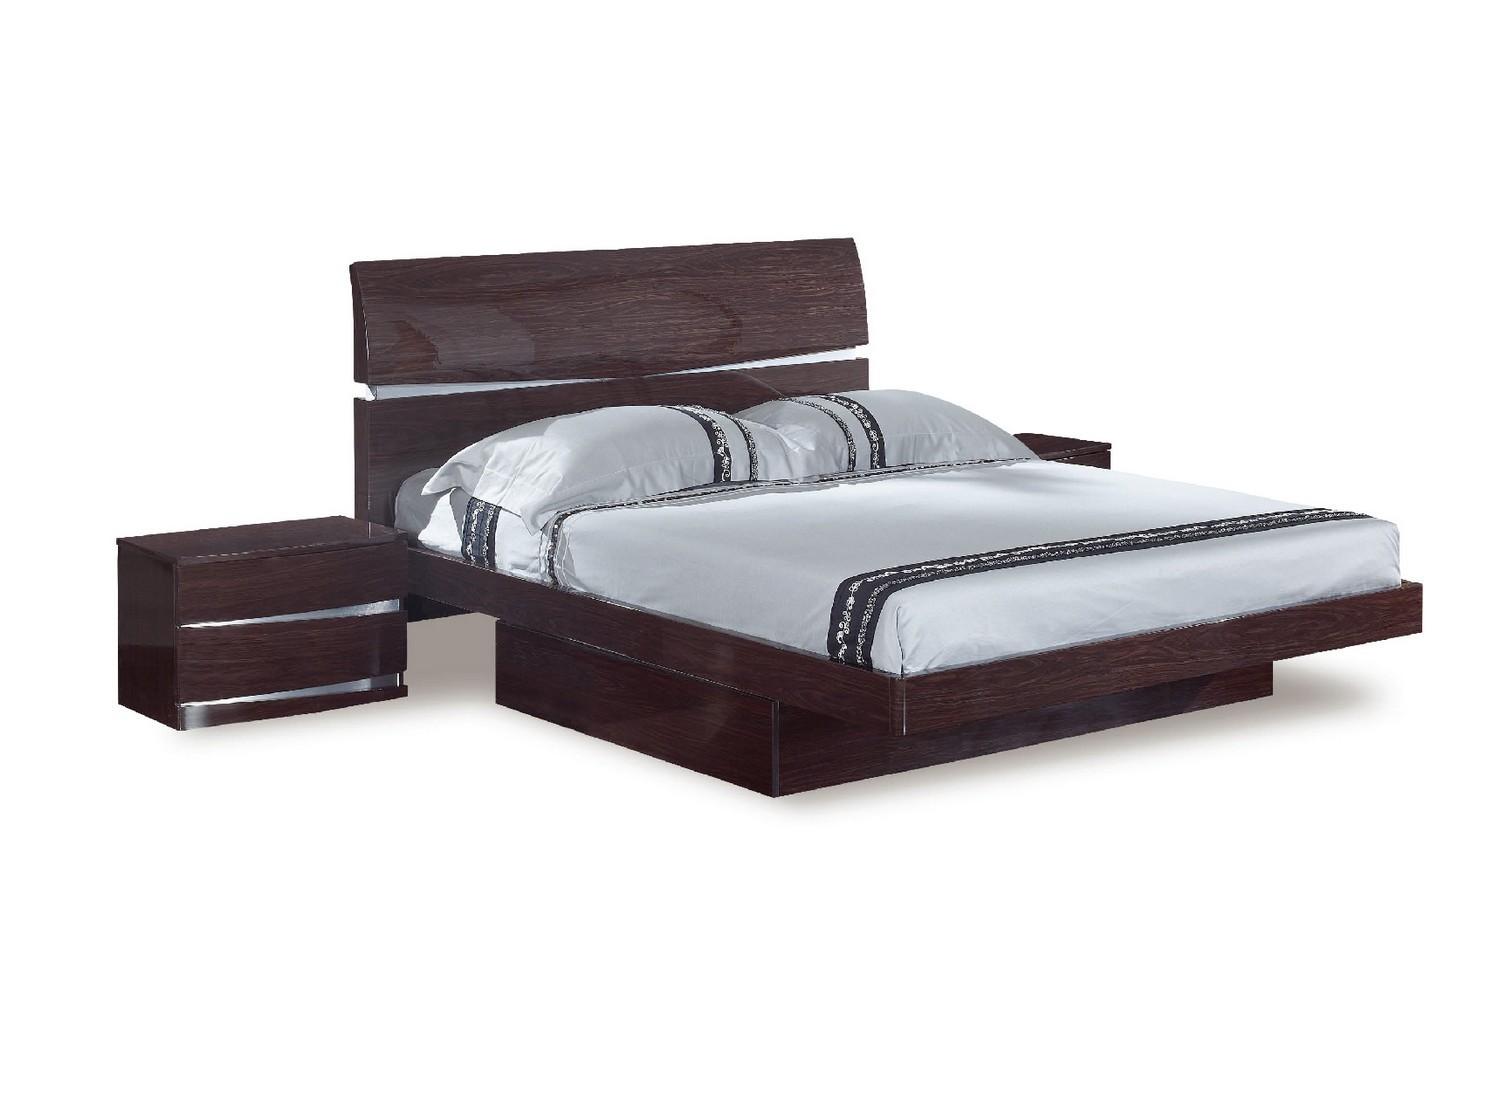 Contemporary, Modern Platform Bedroom Set Wynn WYNN-BED-WENGE-Q-3-PC in Wenge, Silver Lacquer